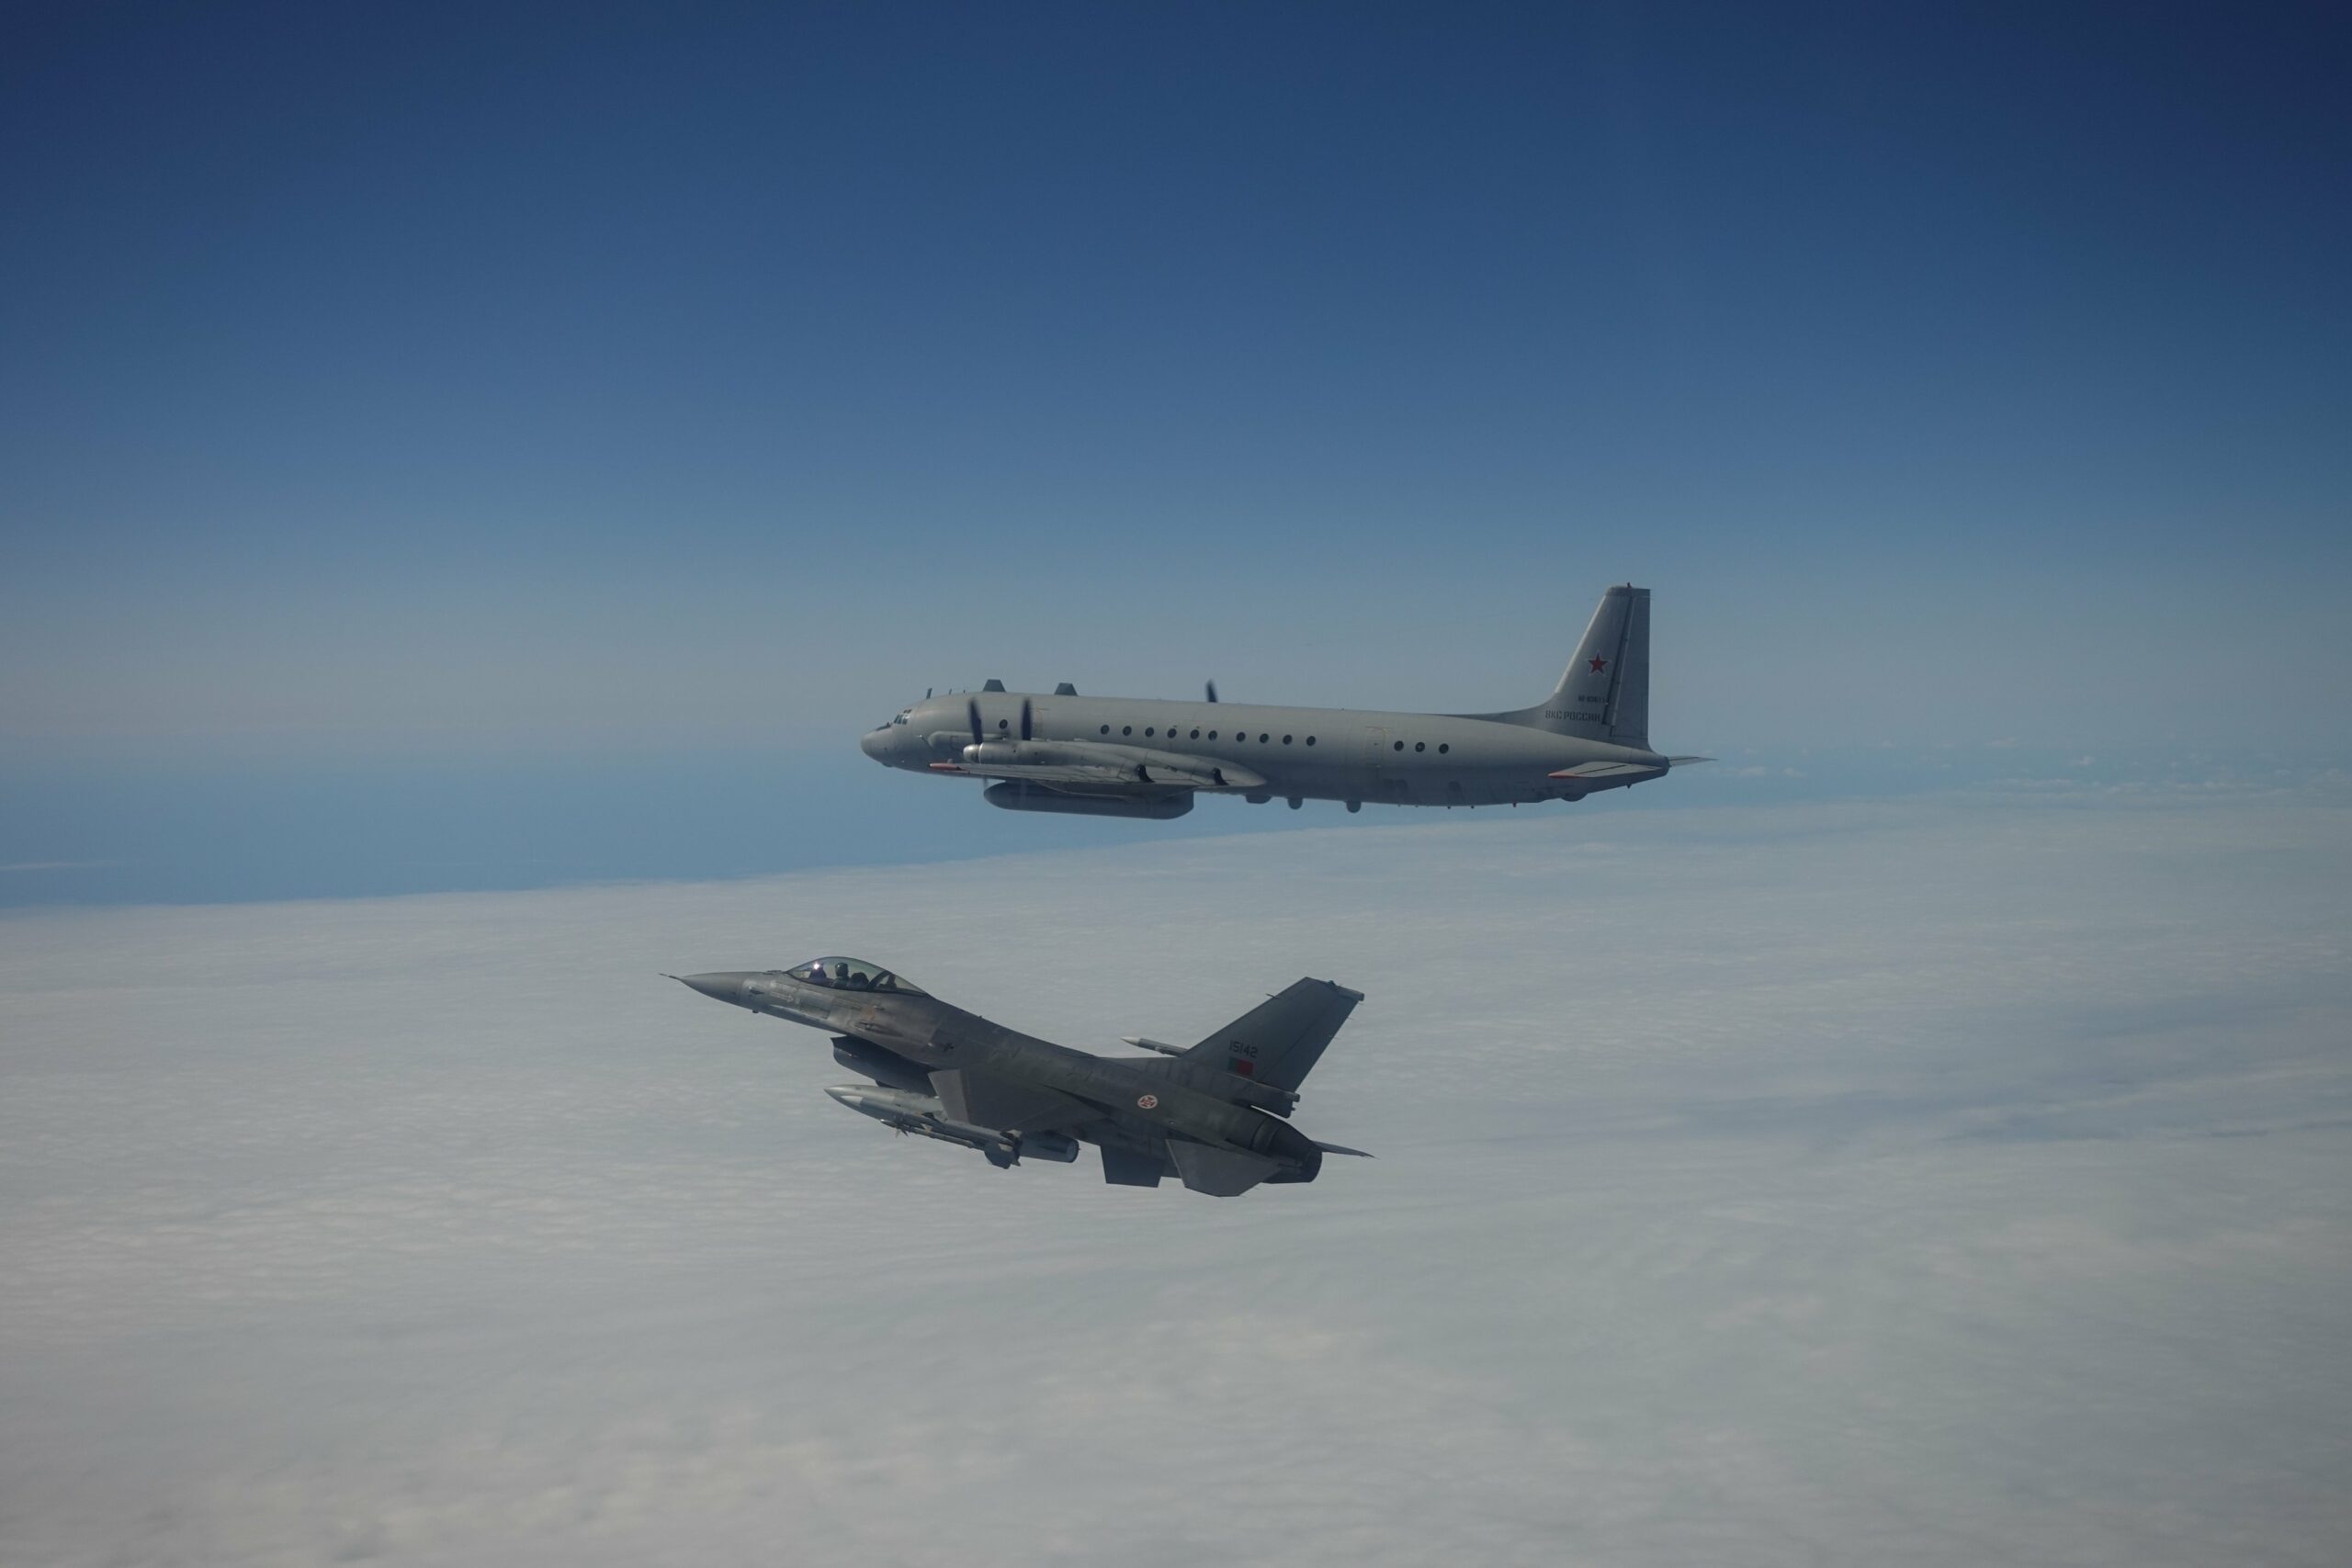 A Portuguese F-16 fighter jet escorting a Russian aircraft out of NATO's airspace above the clouds. Both planes are painted gray. The background is a sea of white clouds and the clear blue sky above.